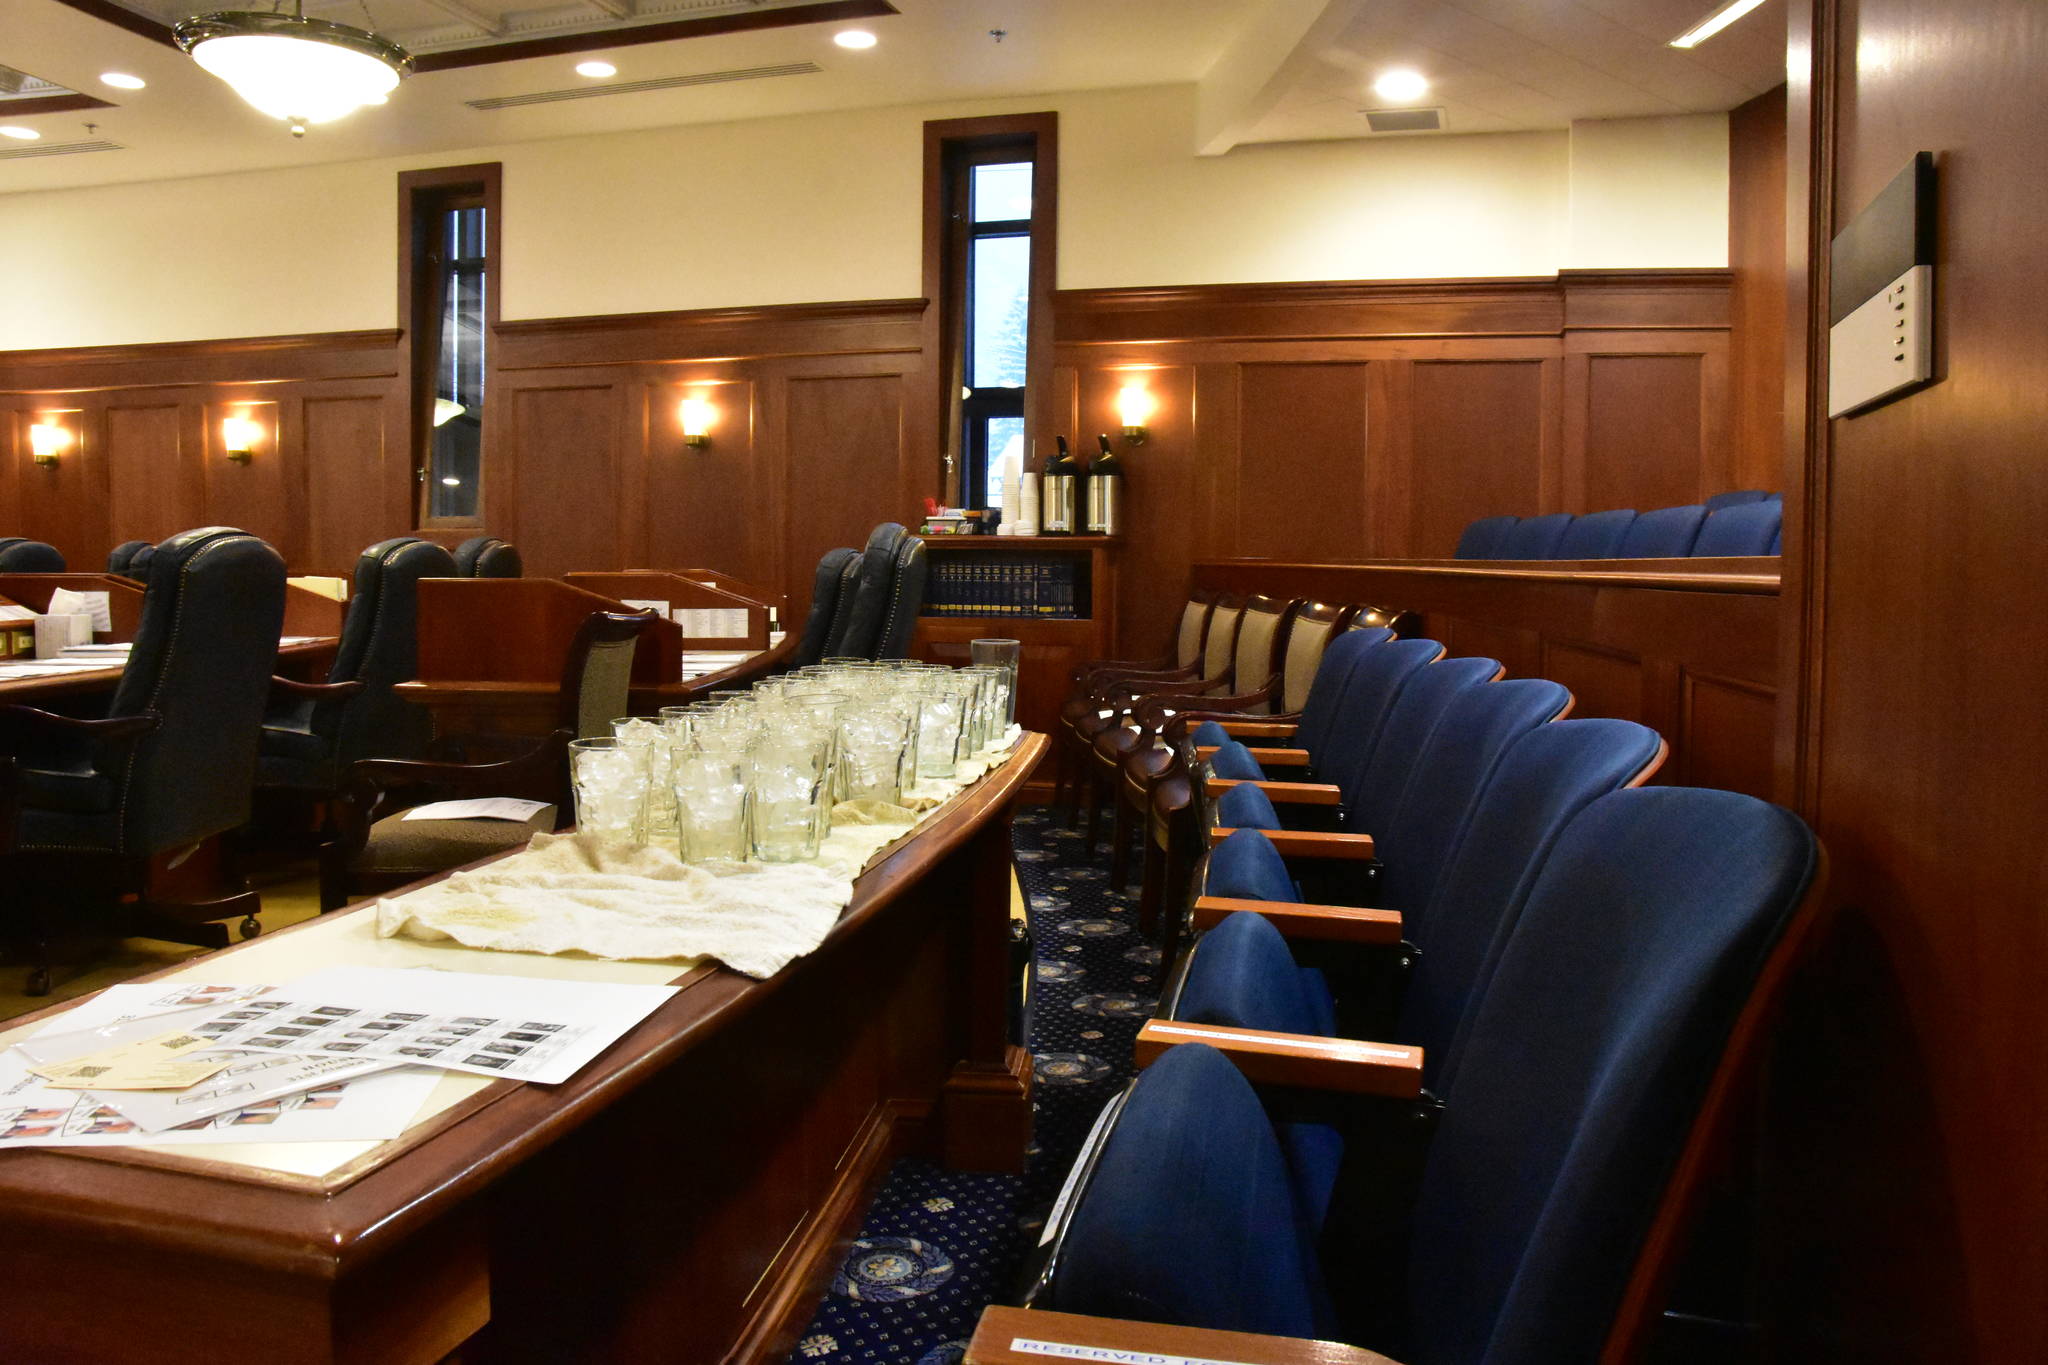 Staff at the Capitol set out extra chairs and water glasses in the House Chambers in preparation for a joint session on Friday, Jan. 24, 2020. (Peter Segall | Juneau Empire)